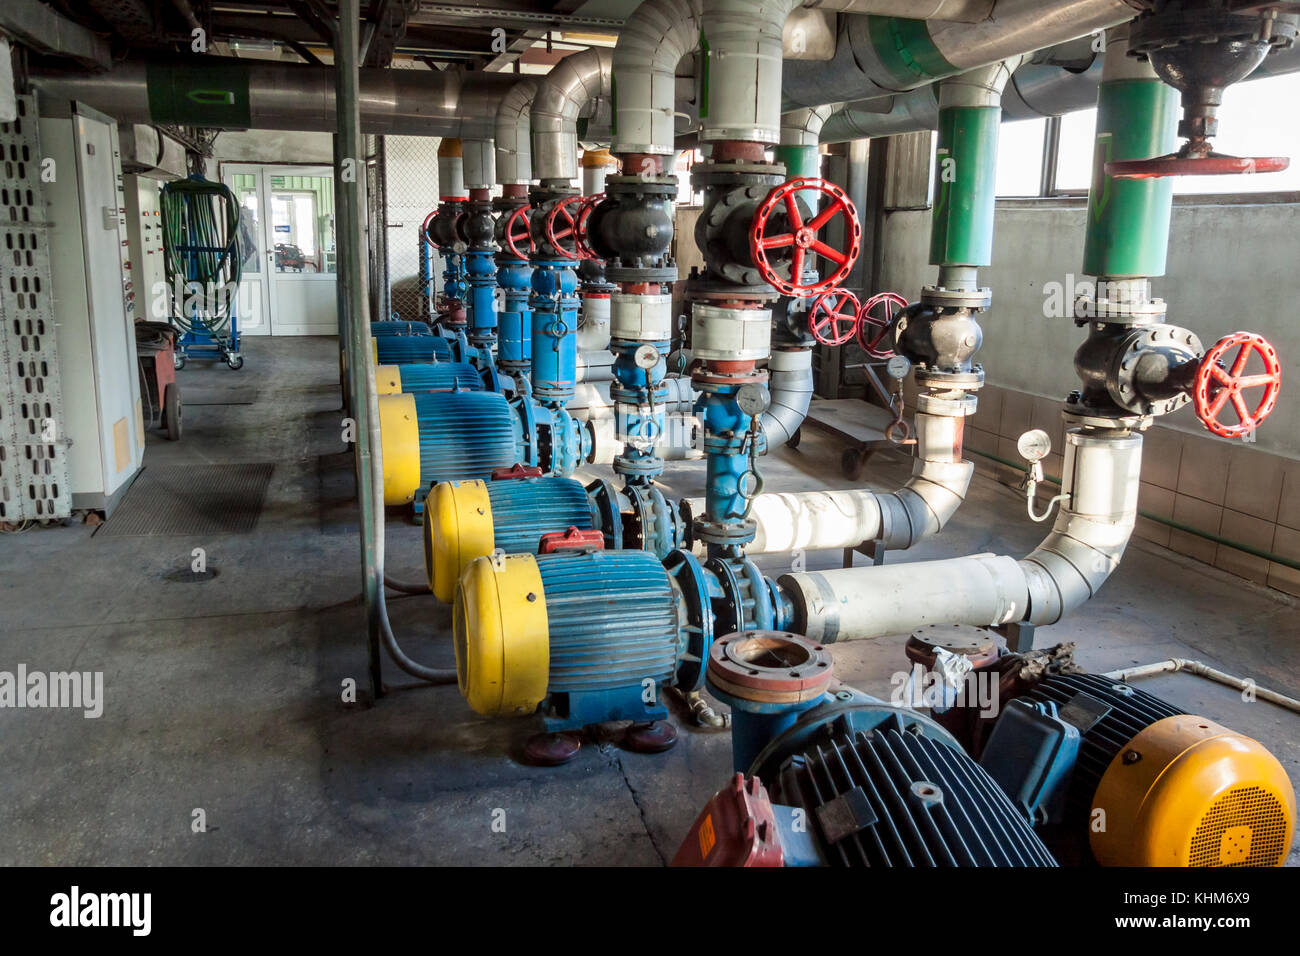 Industrial water pump Stock Photo - Alamy